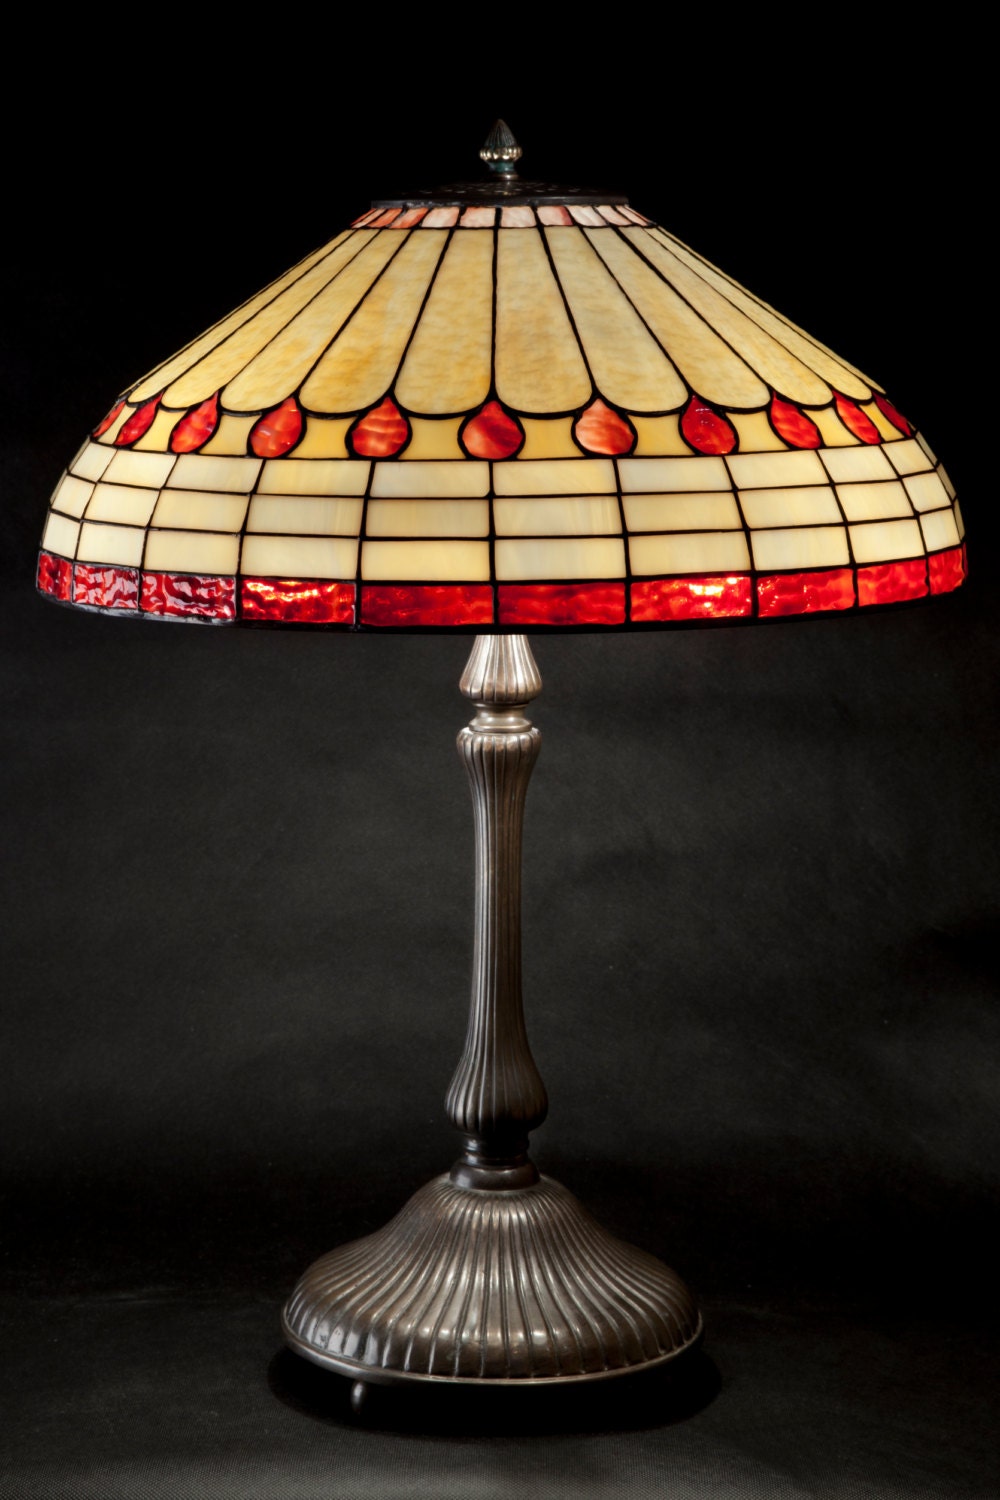 Art Deco Lamp Shade Light, Vintage Lamp Shades For Table Lamps